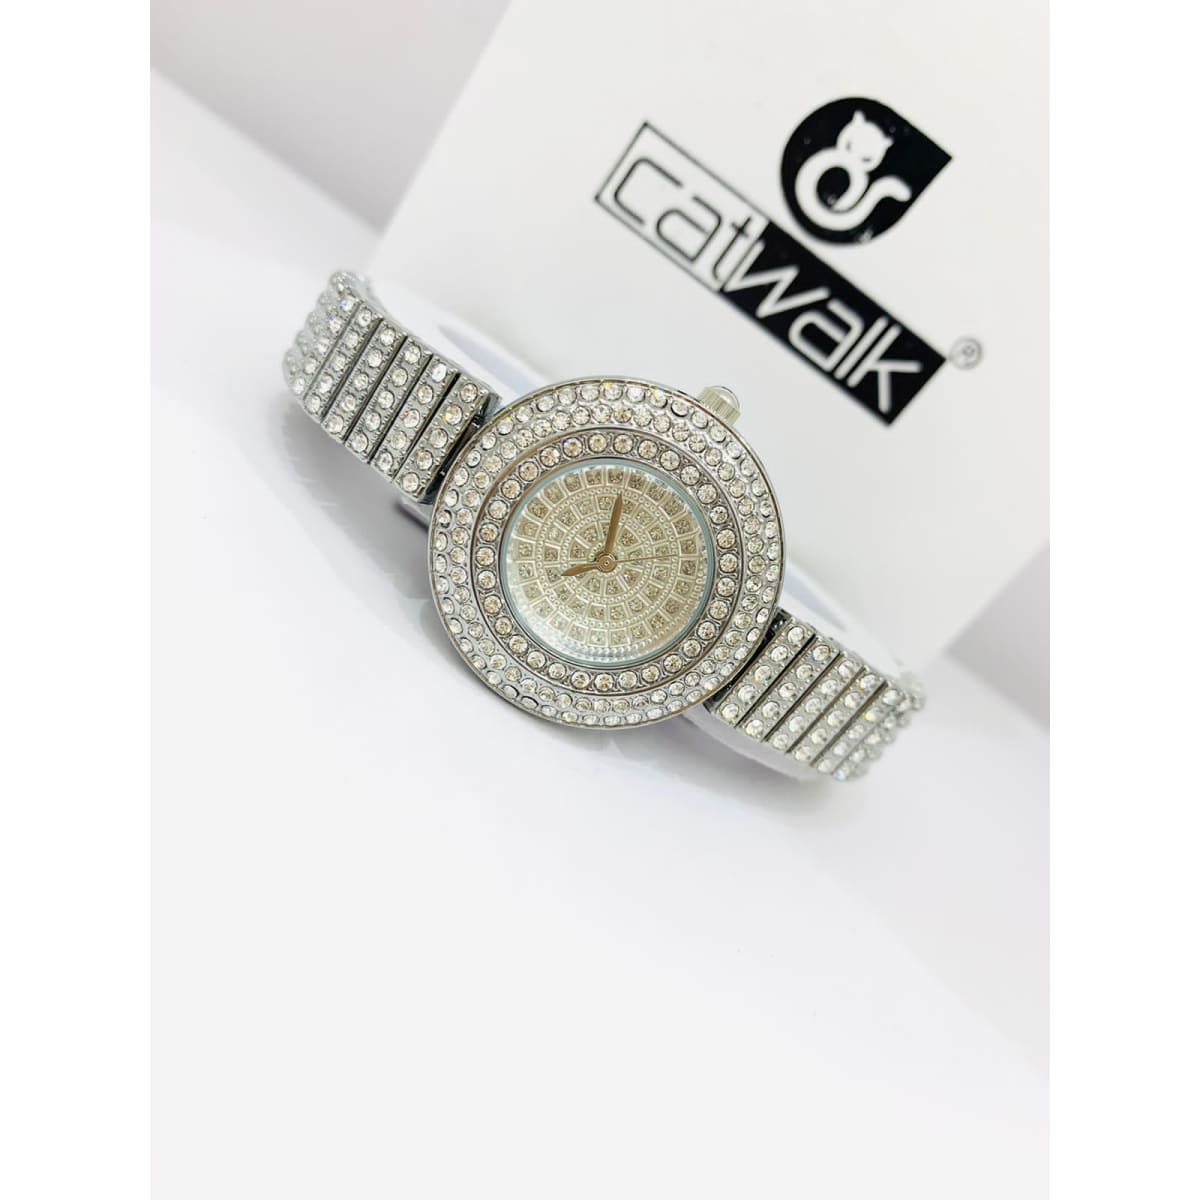 Catwalk CW2022/9 Fashionable Cz Stone Covered Analog Stainless Dial Watch for Women with Gift Box Shop